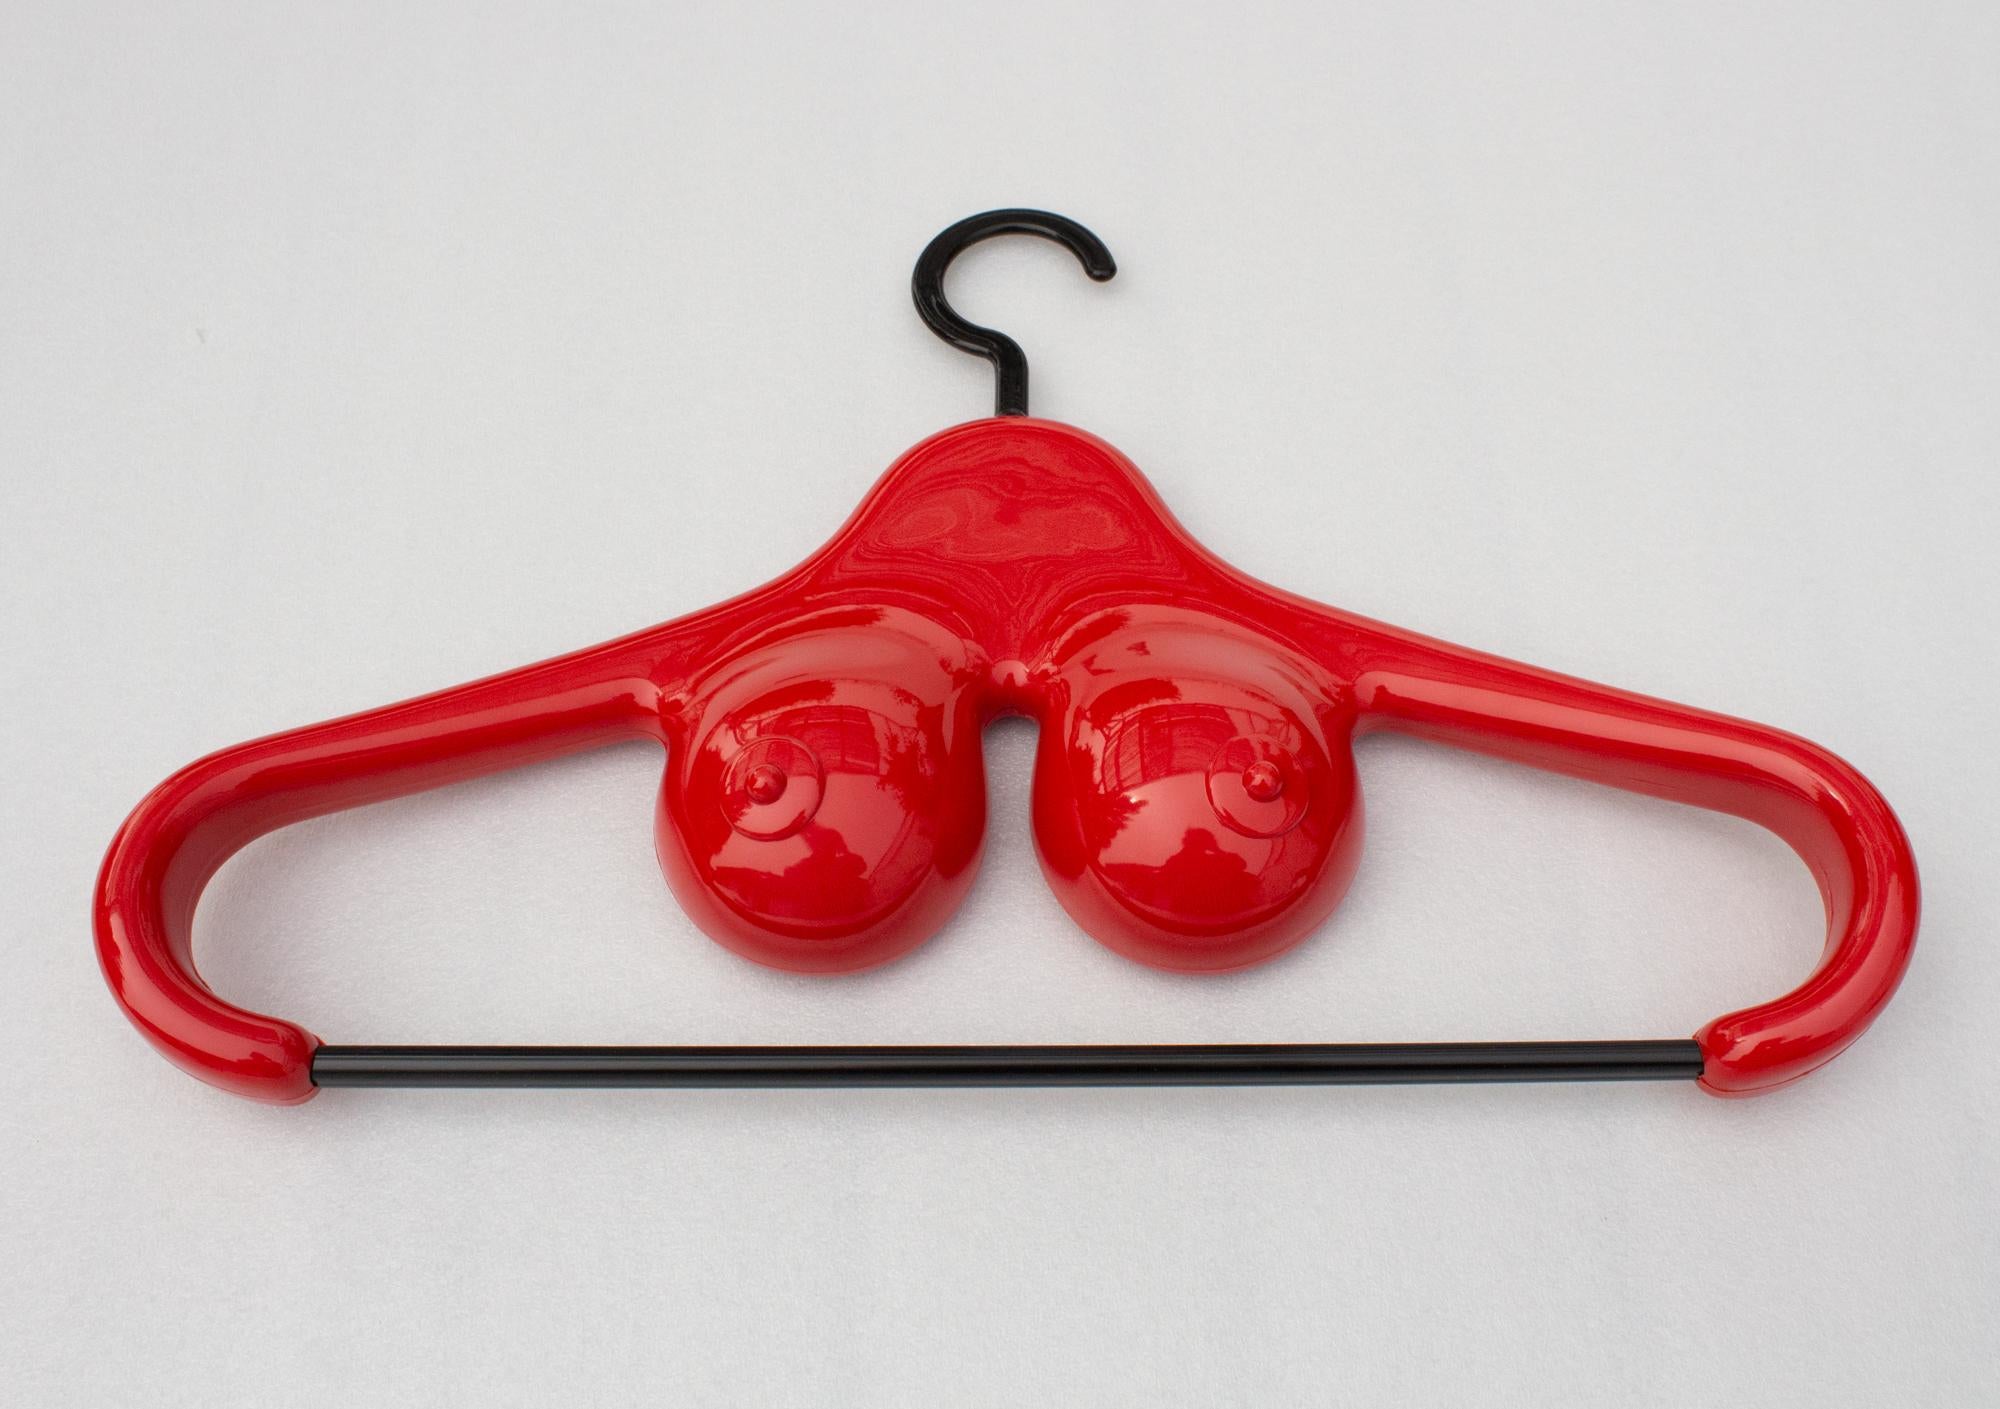 Set of nine Swedish Modern provocative coat hangers in red plastic. The hangers named ”Svea” are made by A&E Design and is extremely rare. Unused and coverd in its original packing. A wonderful set of a fun Swedish surprise in your wardrobe.